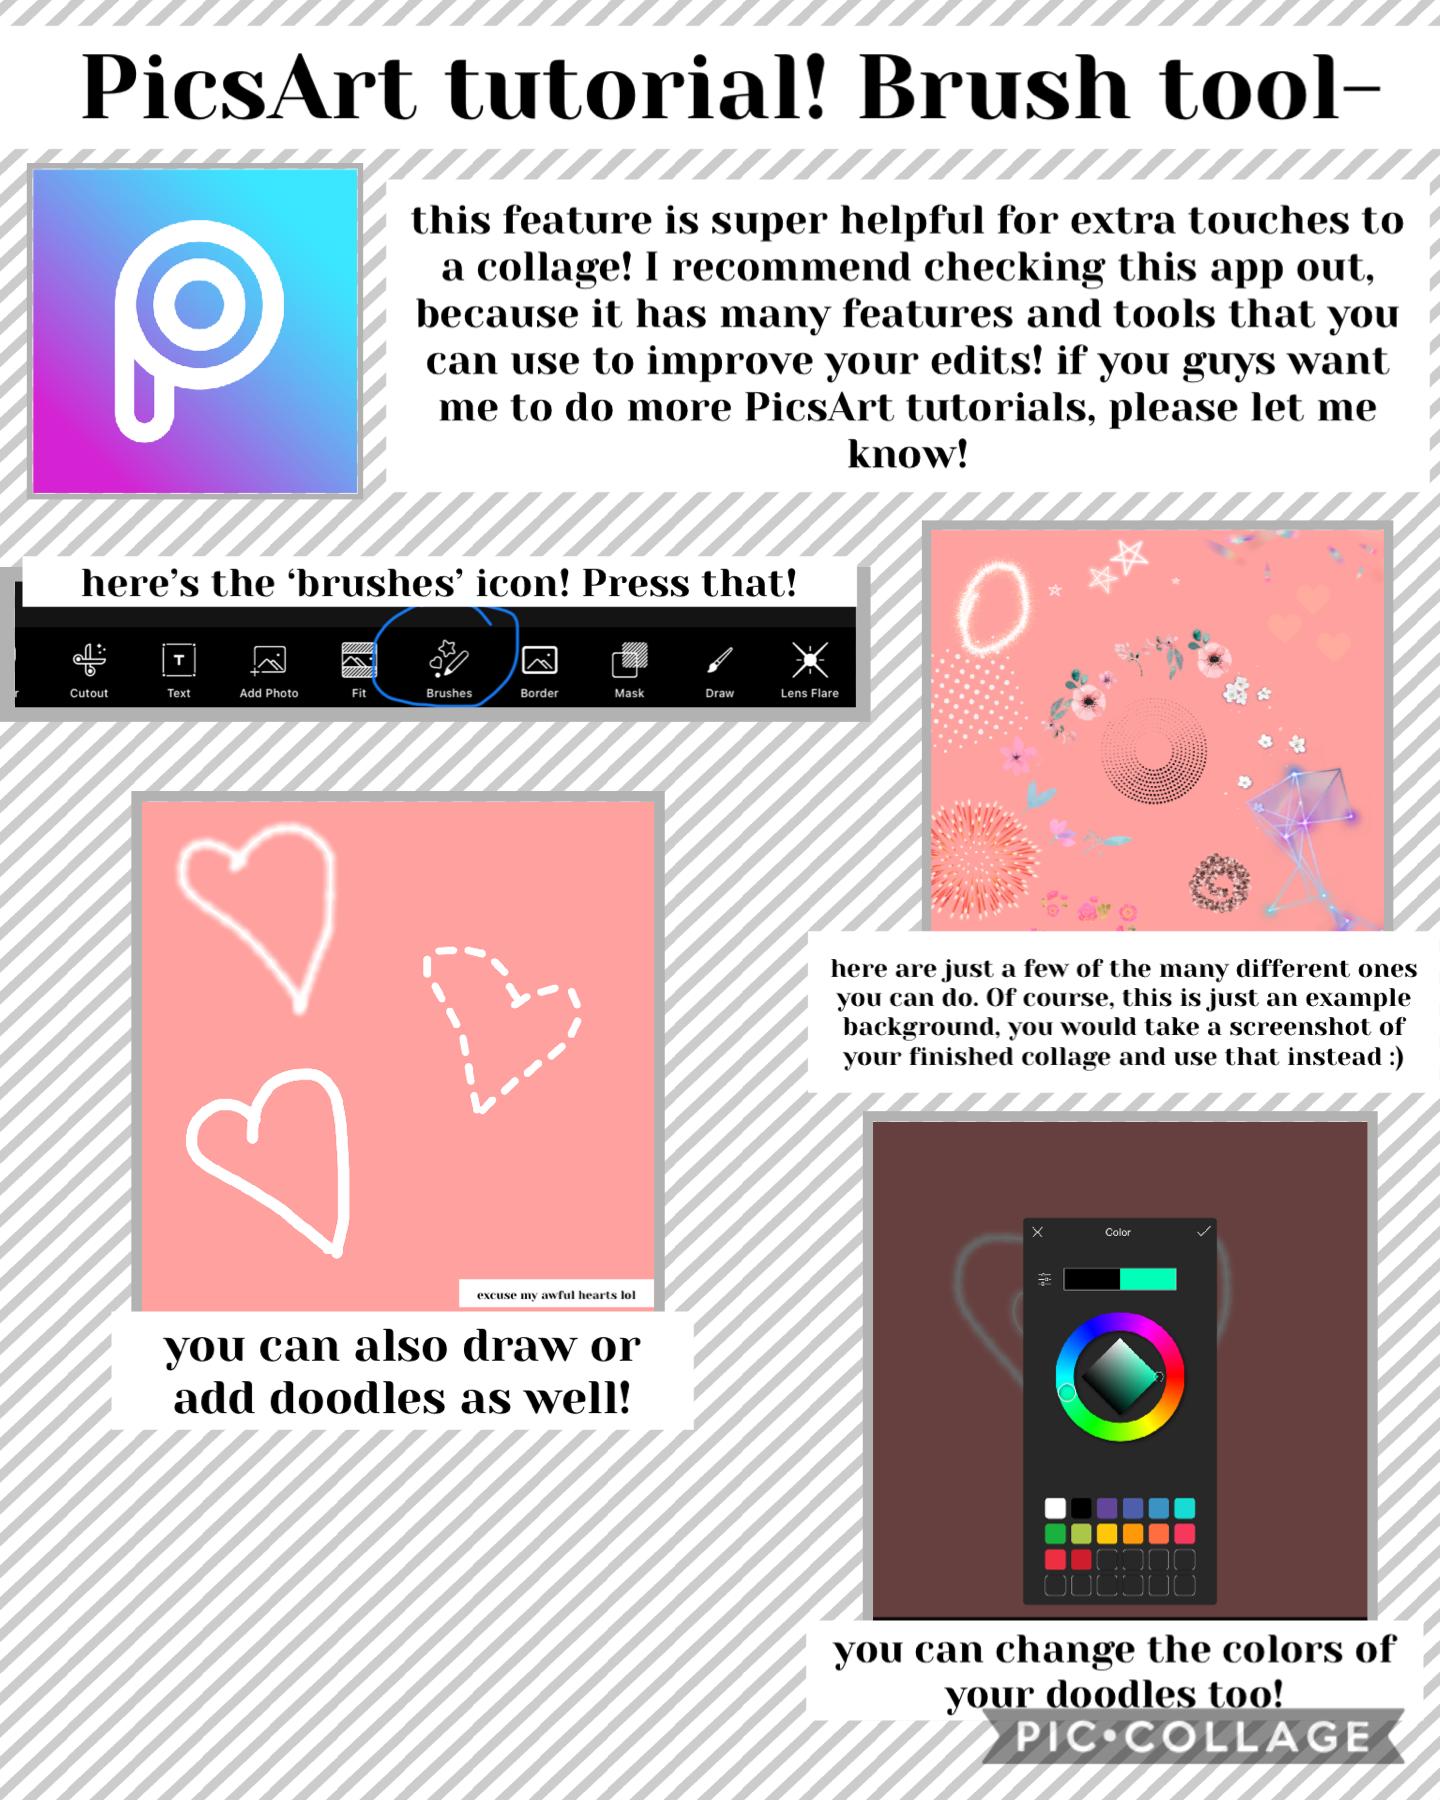 TAPP

PicsArt tutorial #1! If you have any requests, please comment!